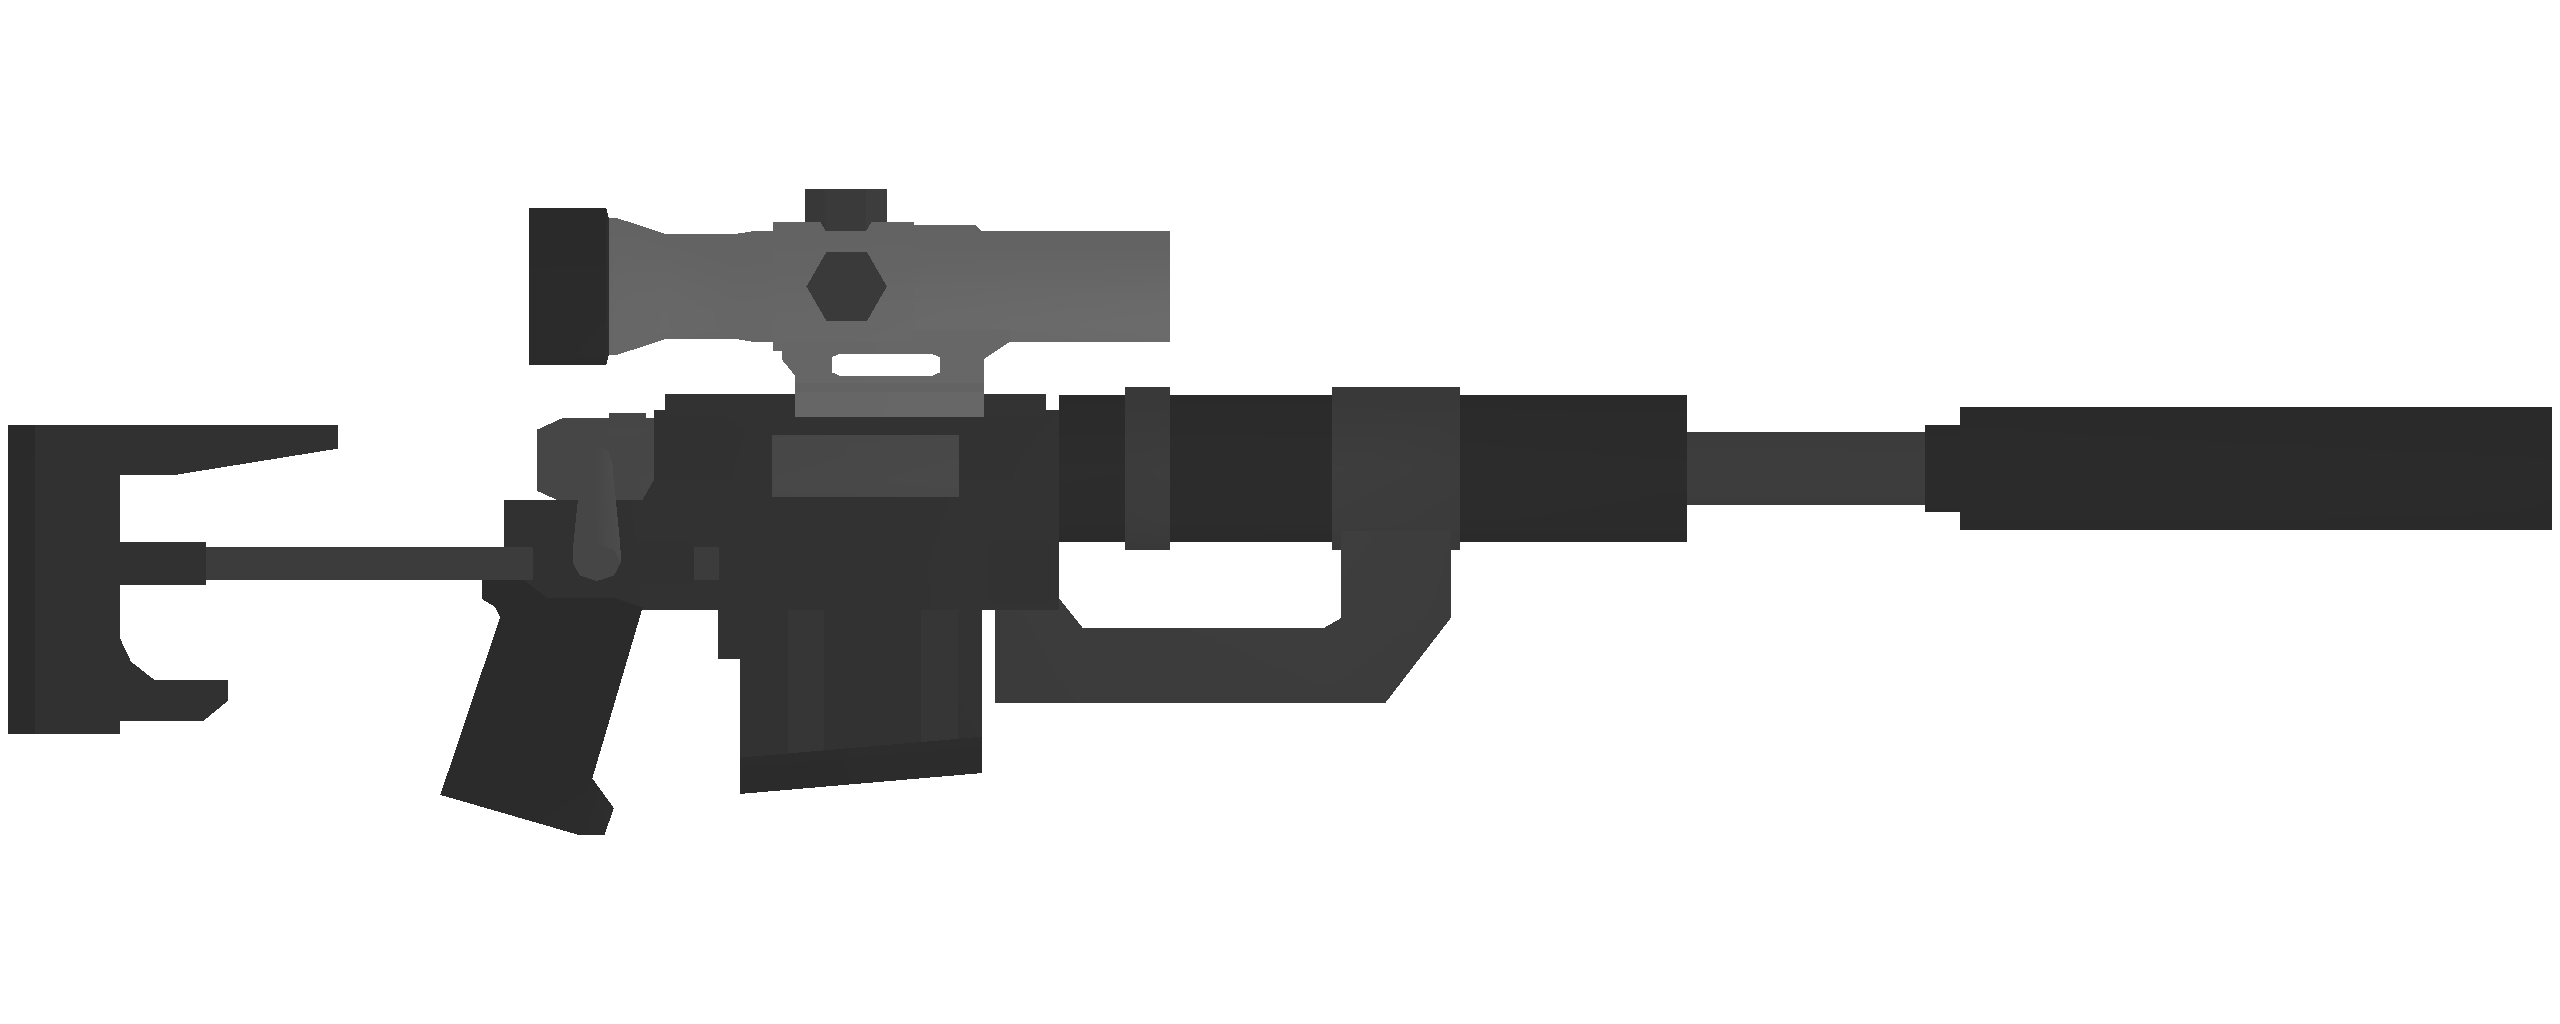 Unturned - Kuwait Items Redux + ID List for Magazines and Attachments - Sniper Rifles - 04CDC09